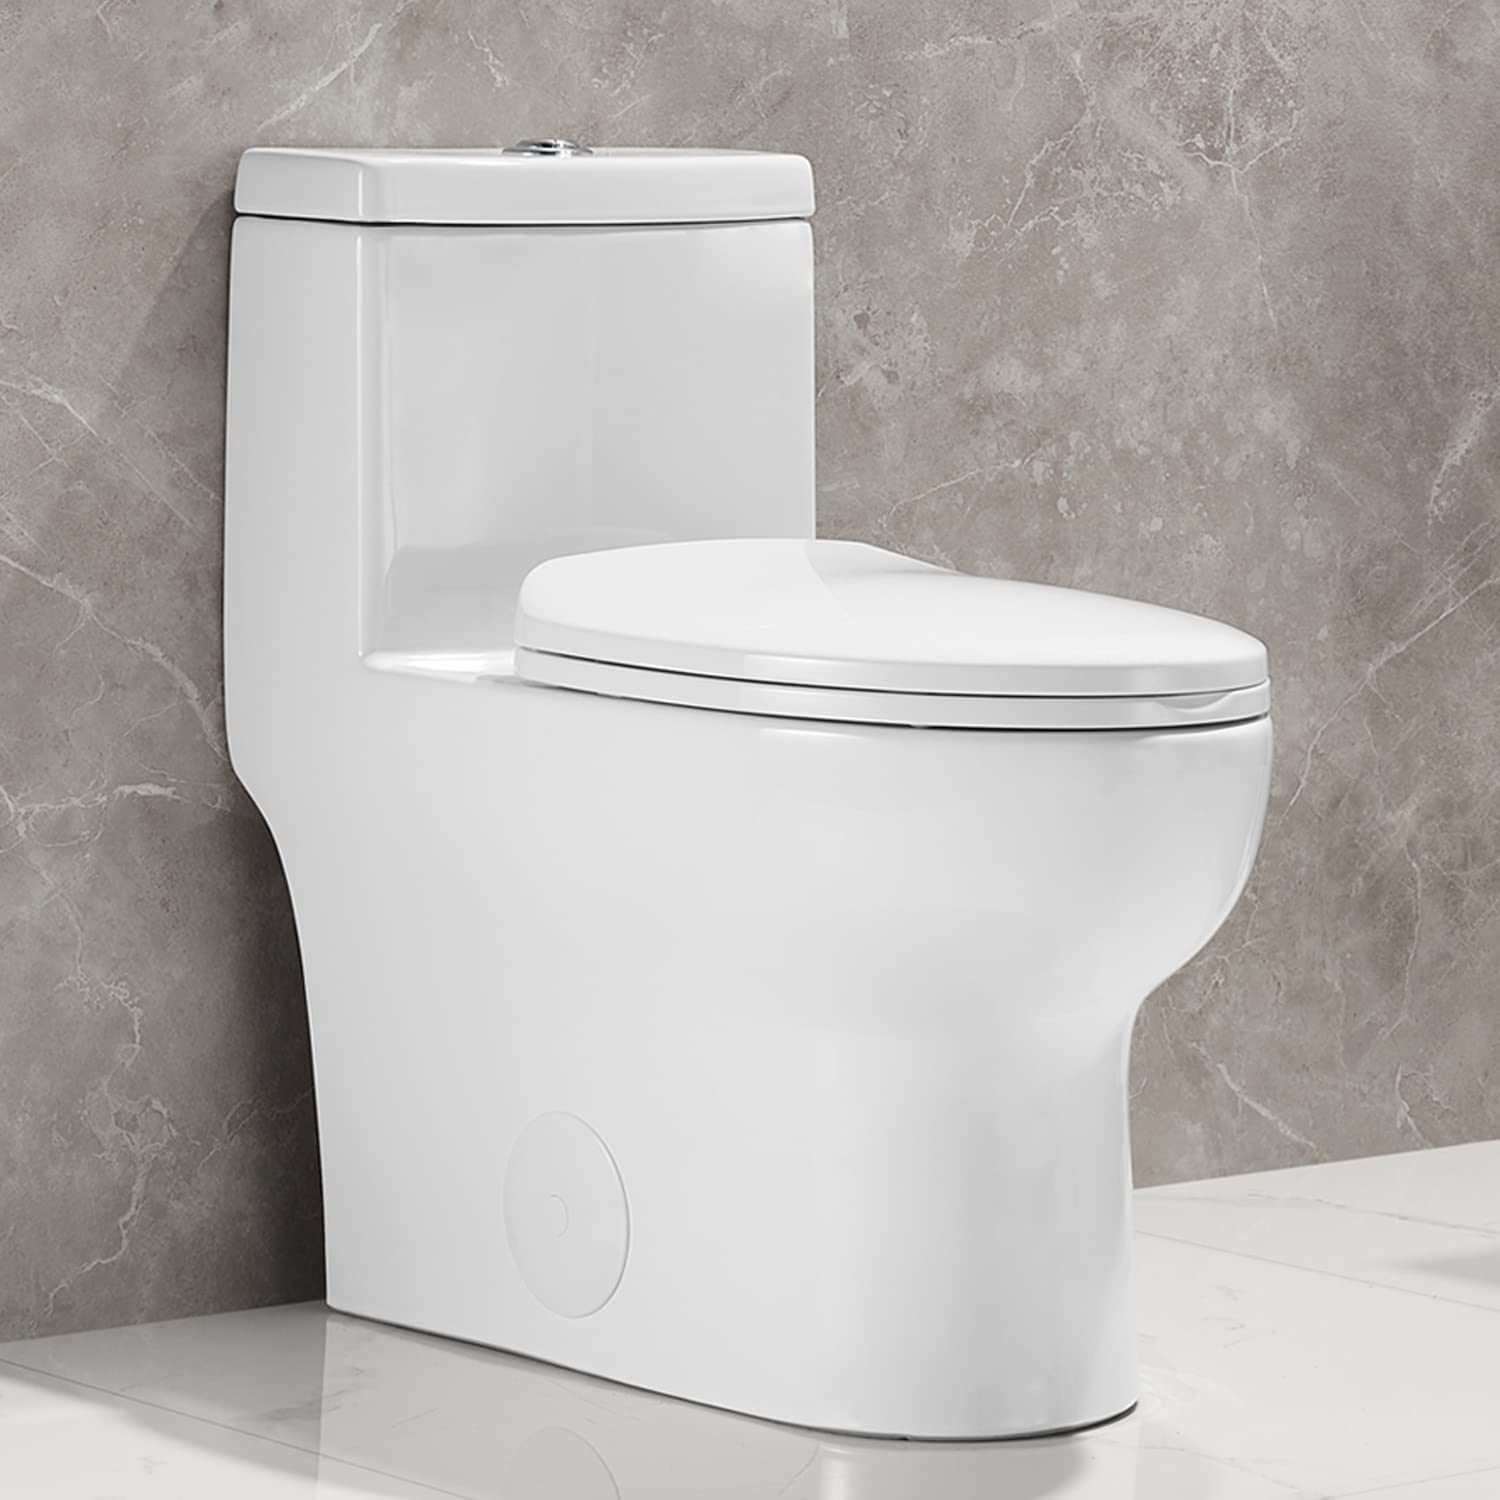 DeerValley DV-1F026 Dual Flush Elongated Standard One Piece Toilet with Comfortable Seat Height, Soft Close Seat Cover, High-Efficiency Supply, and White Finish Toilet Bowl